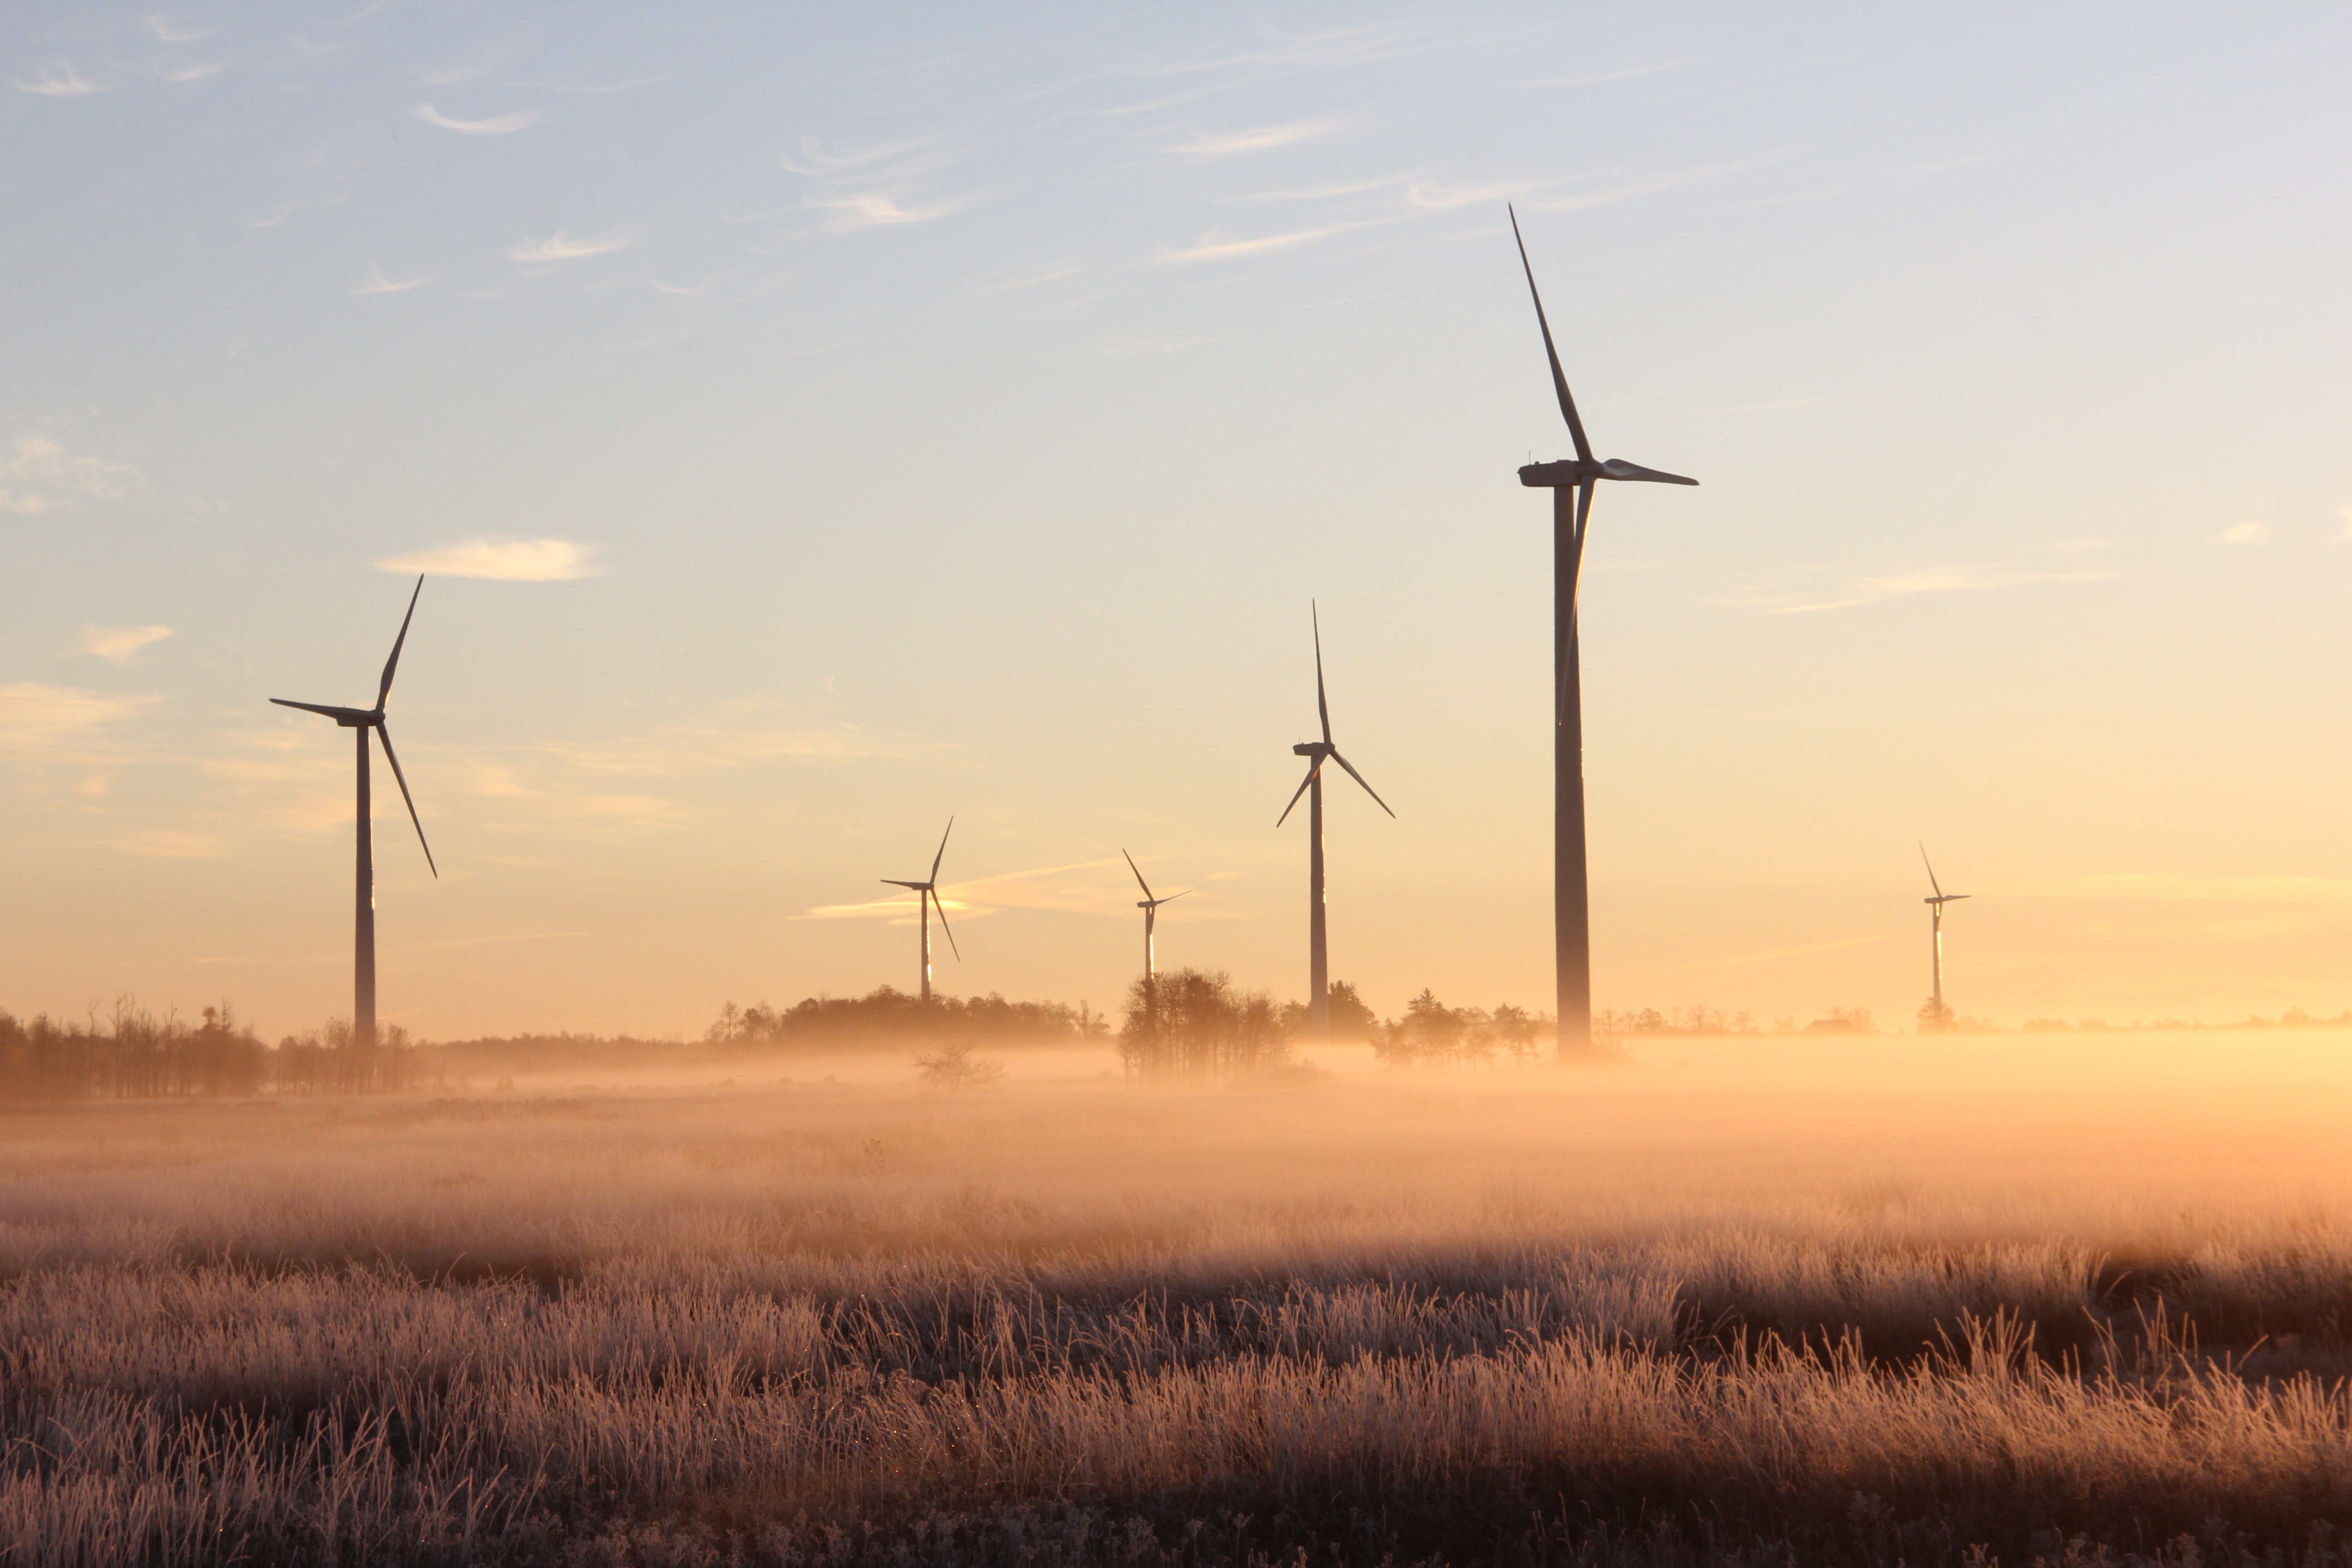 Power-producing windmills in a foggy field for Shipley Energy's October energy market update